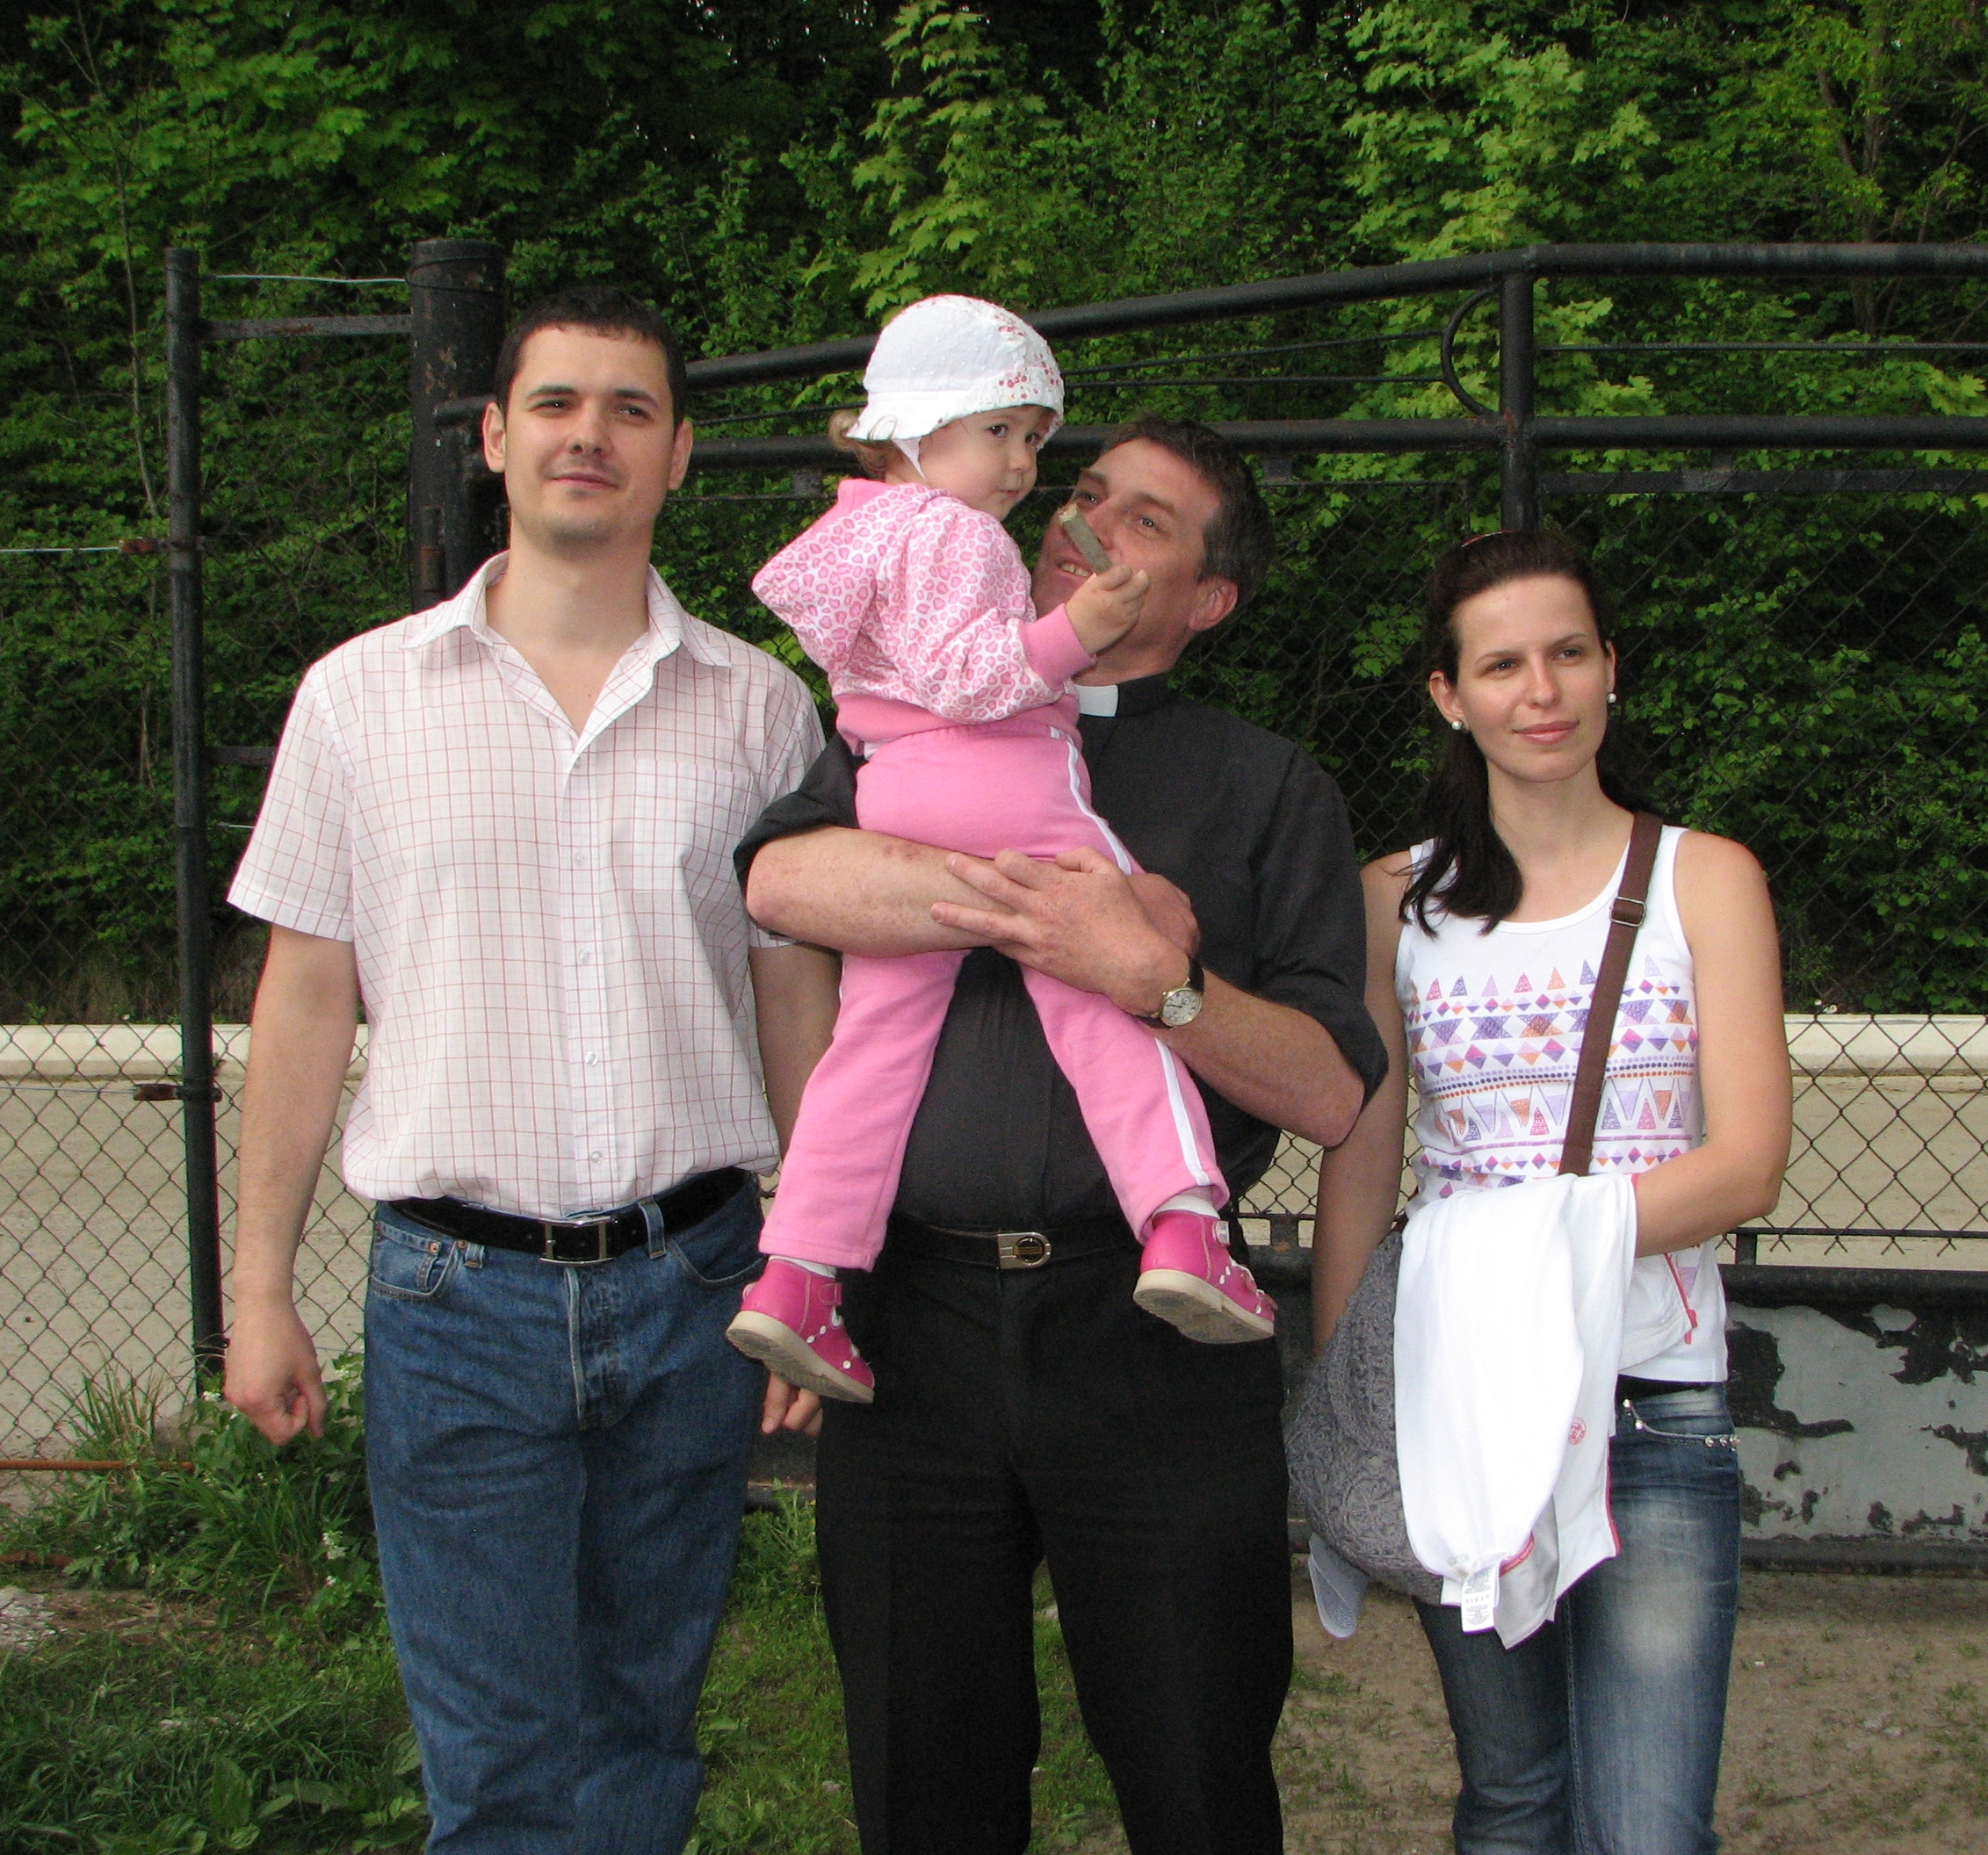 A Catholic priest (in the middle) with a young family, pic 1